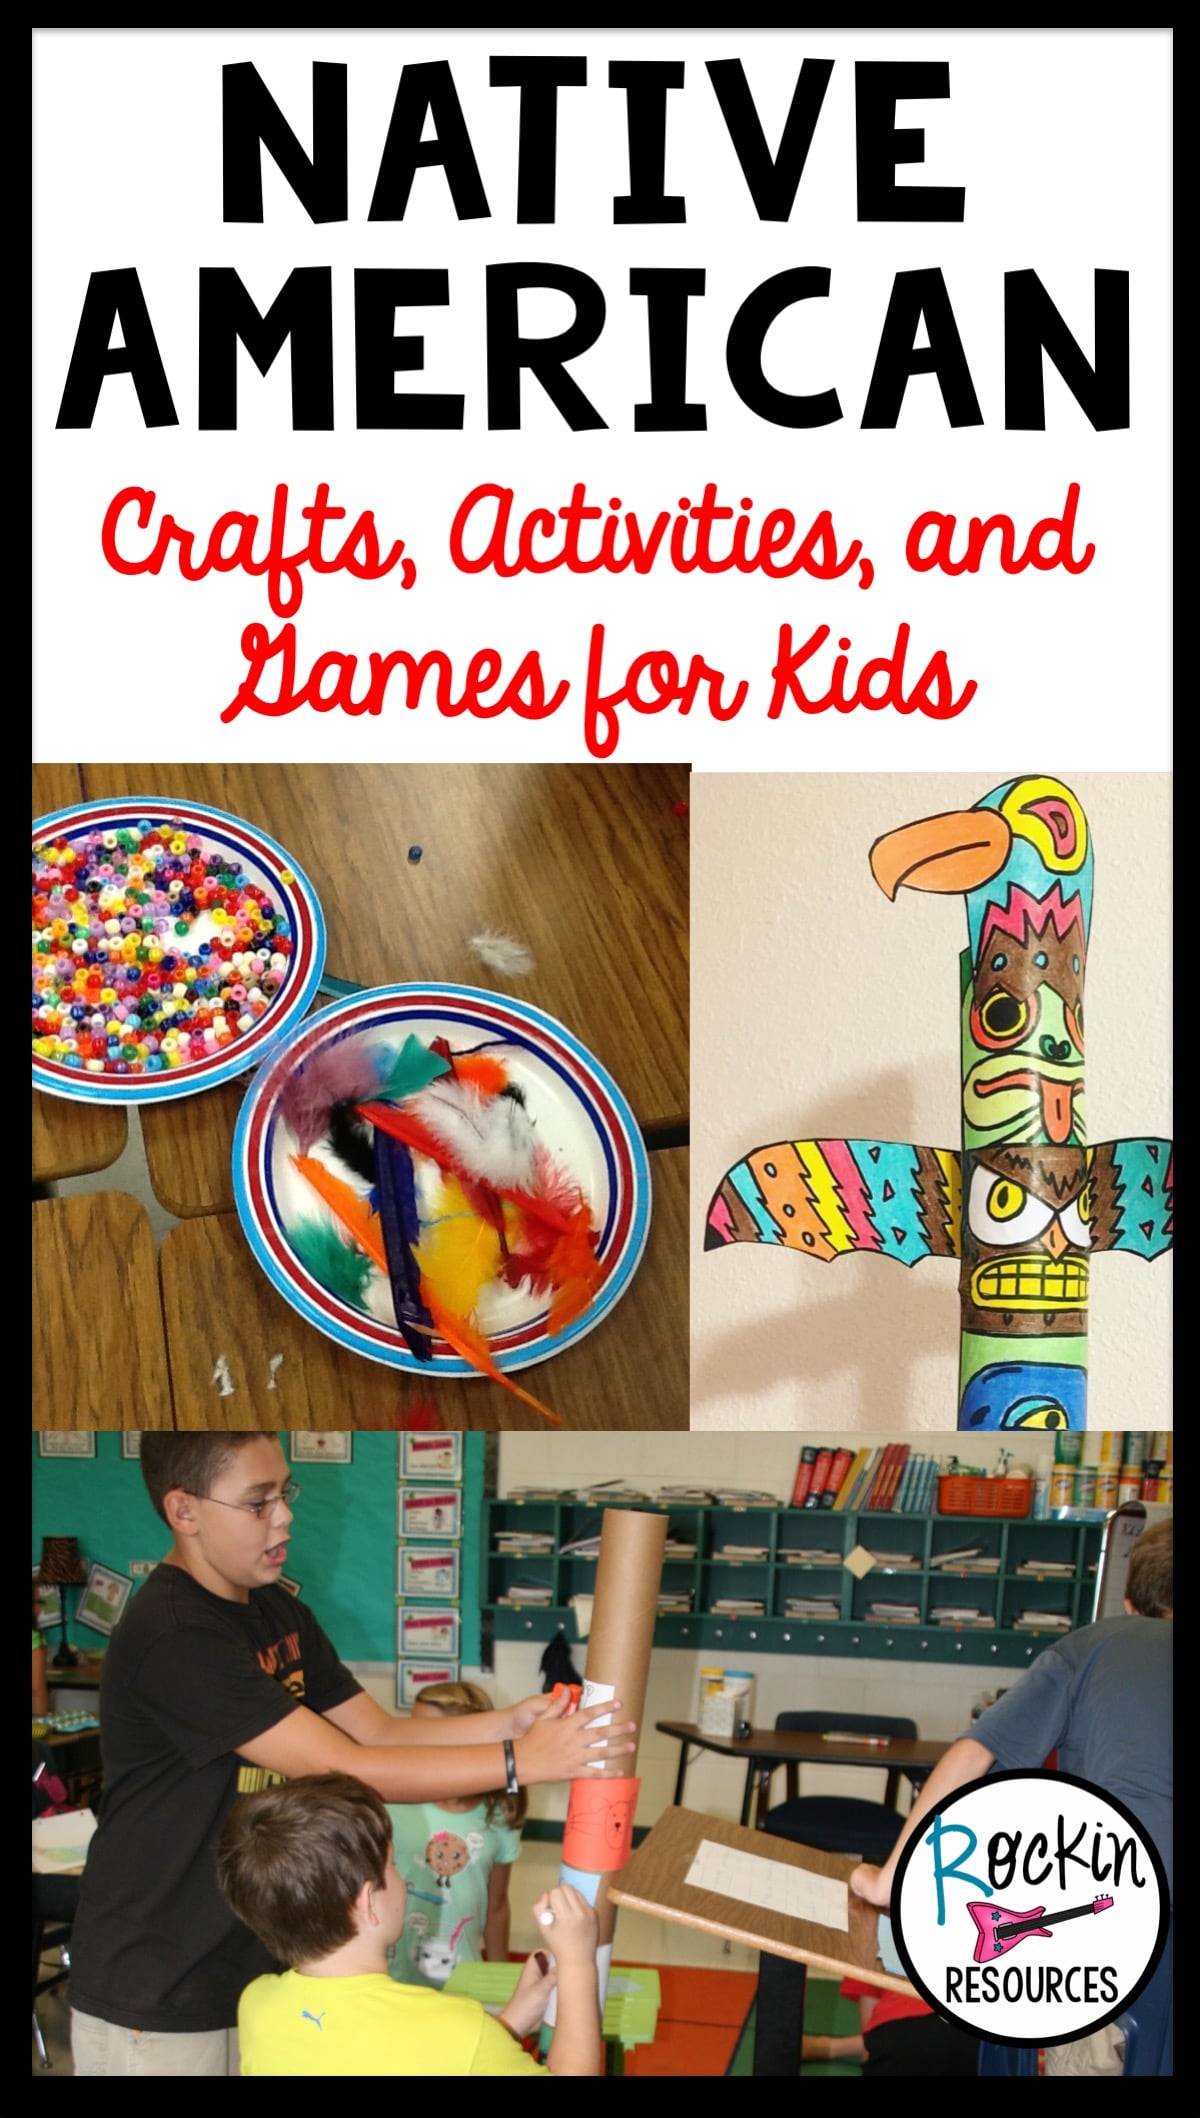 native-american-crafts-activities-and-games-for-kids-rockin-resources